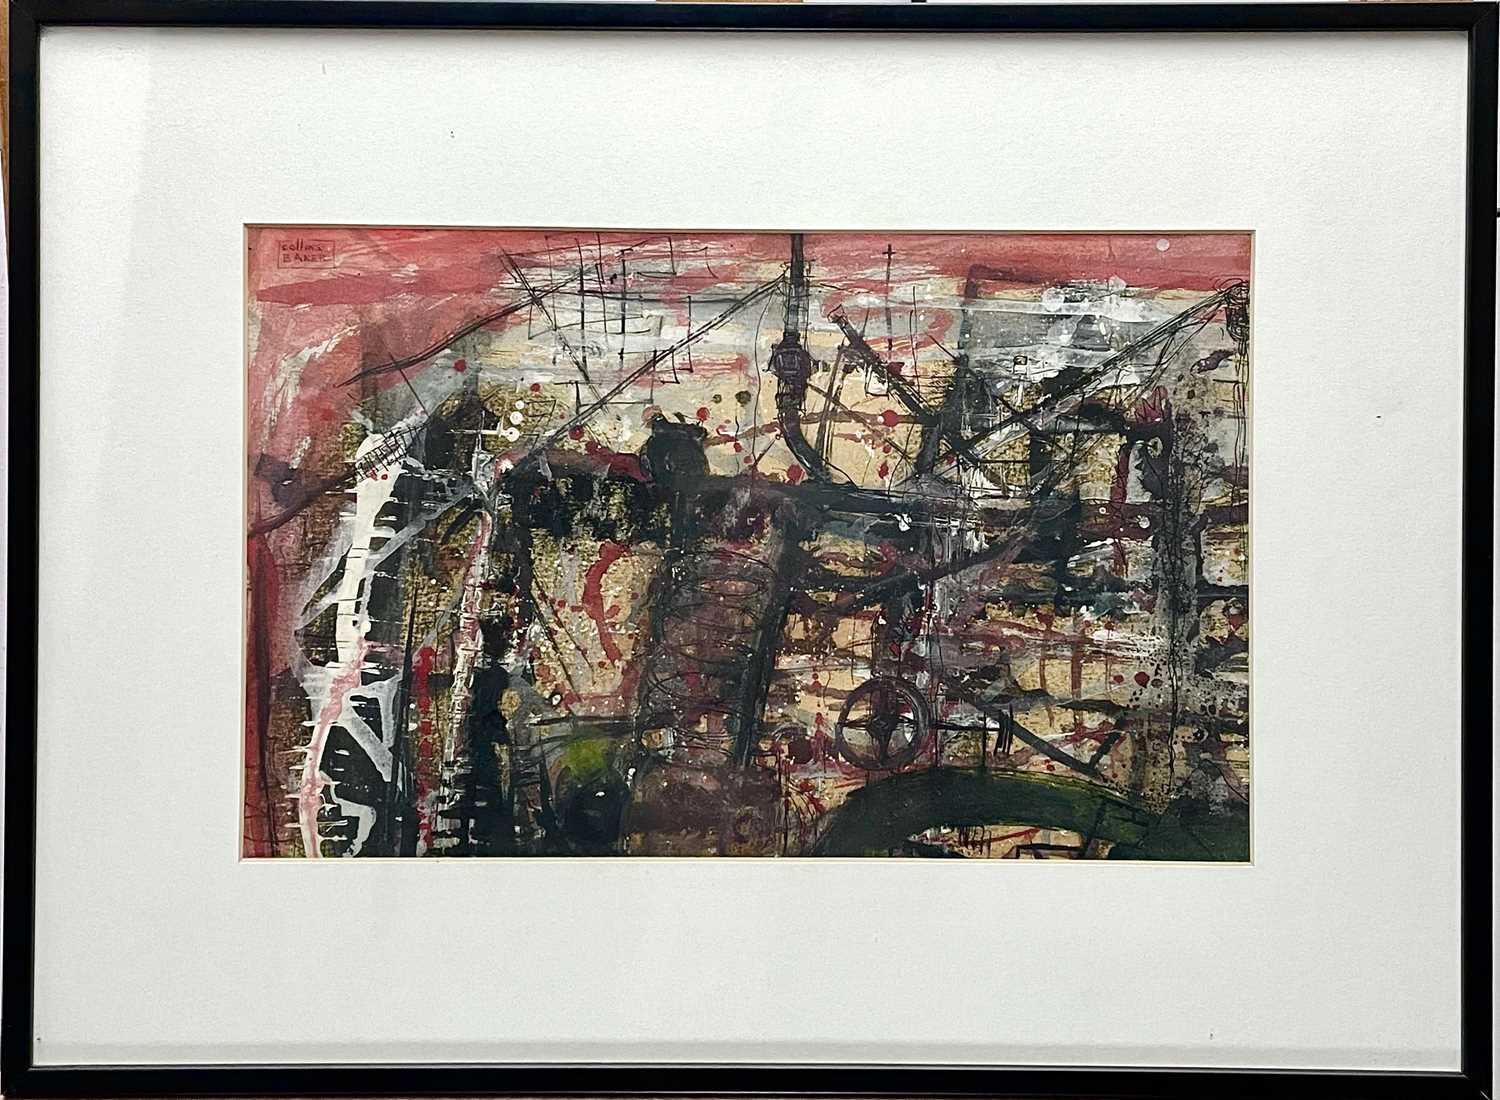 James COLLINS BAKER Derelict Pier Cowes I.O.W. 1961 Ink & Gouache on paper 22.5 x 37cm Signed - Image 2 of 3